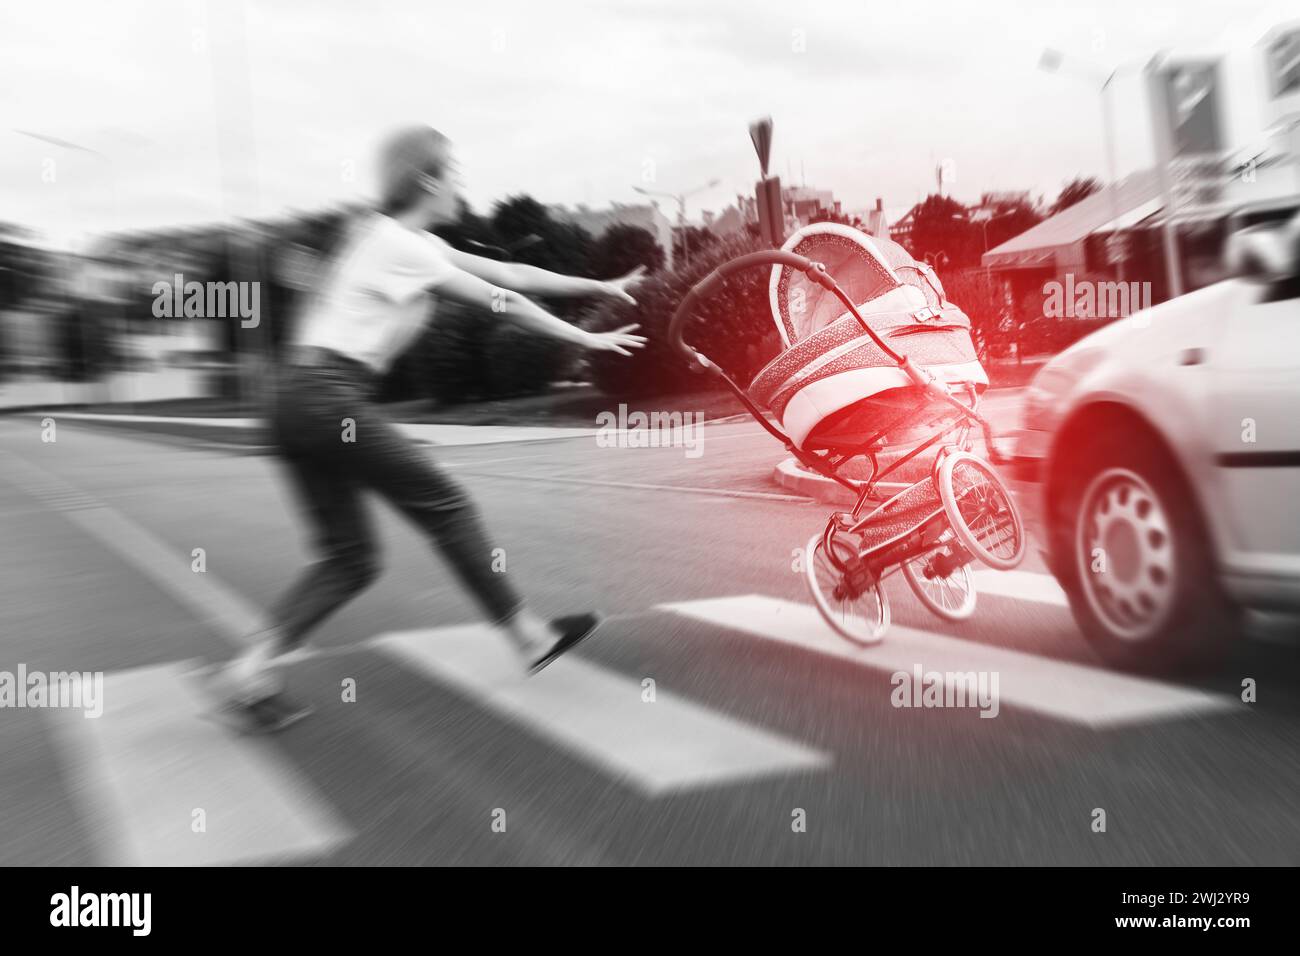 Car accident on the crosswalk. Vehicle hits the baby pram at high speed. Stock Photo